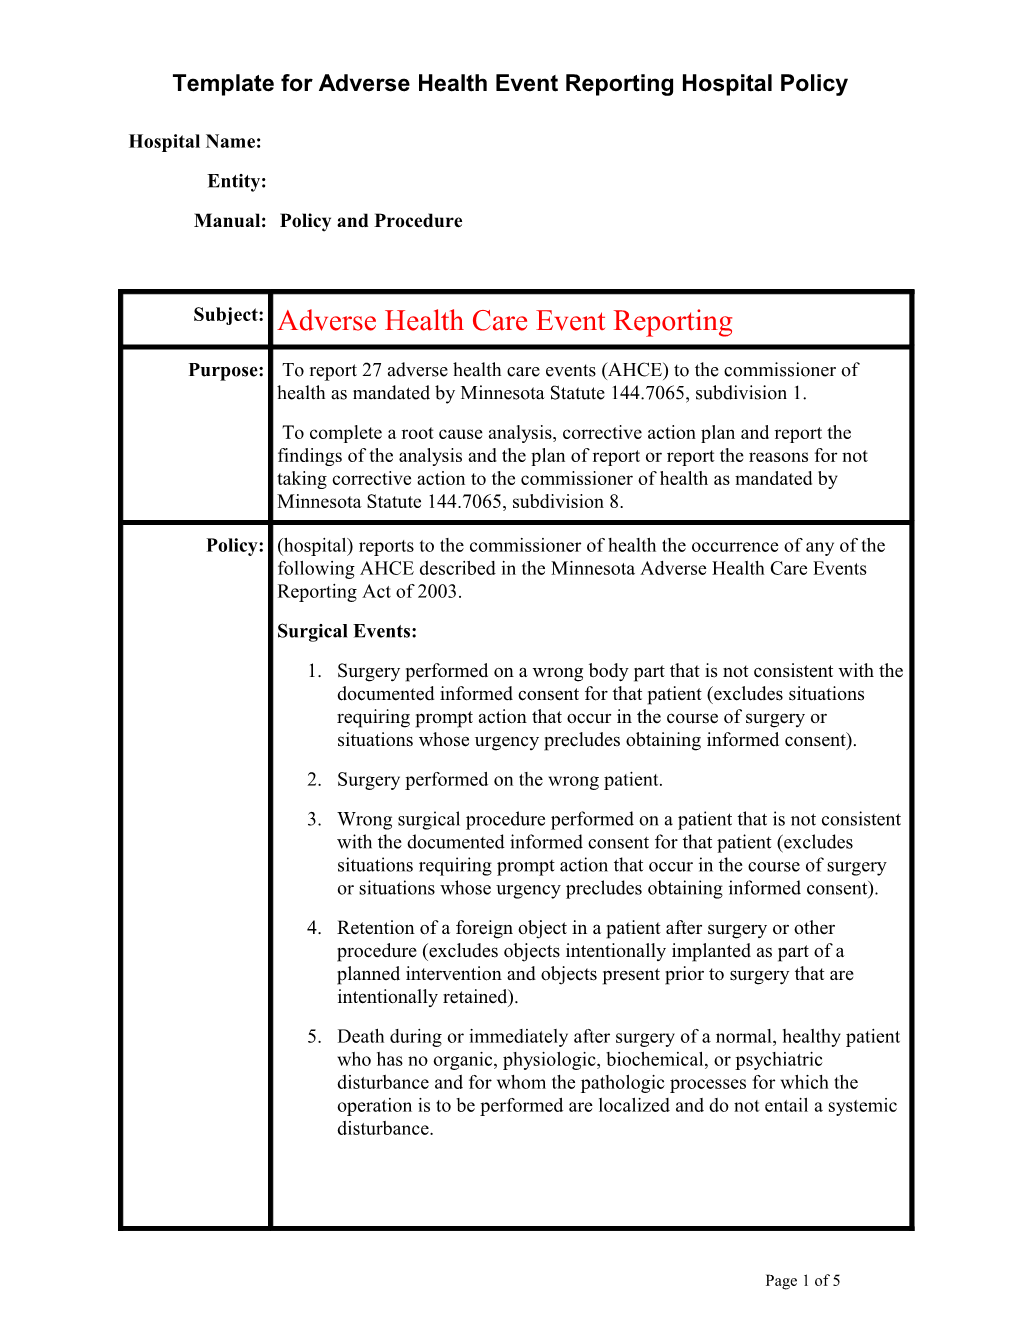 Template for Adverse Health Event Reporting Hospital Policy